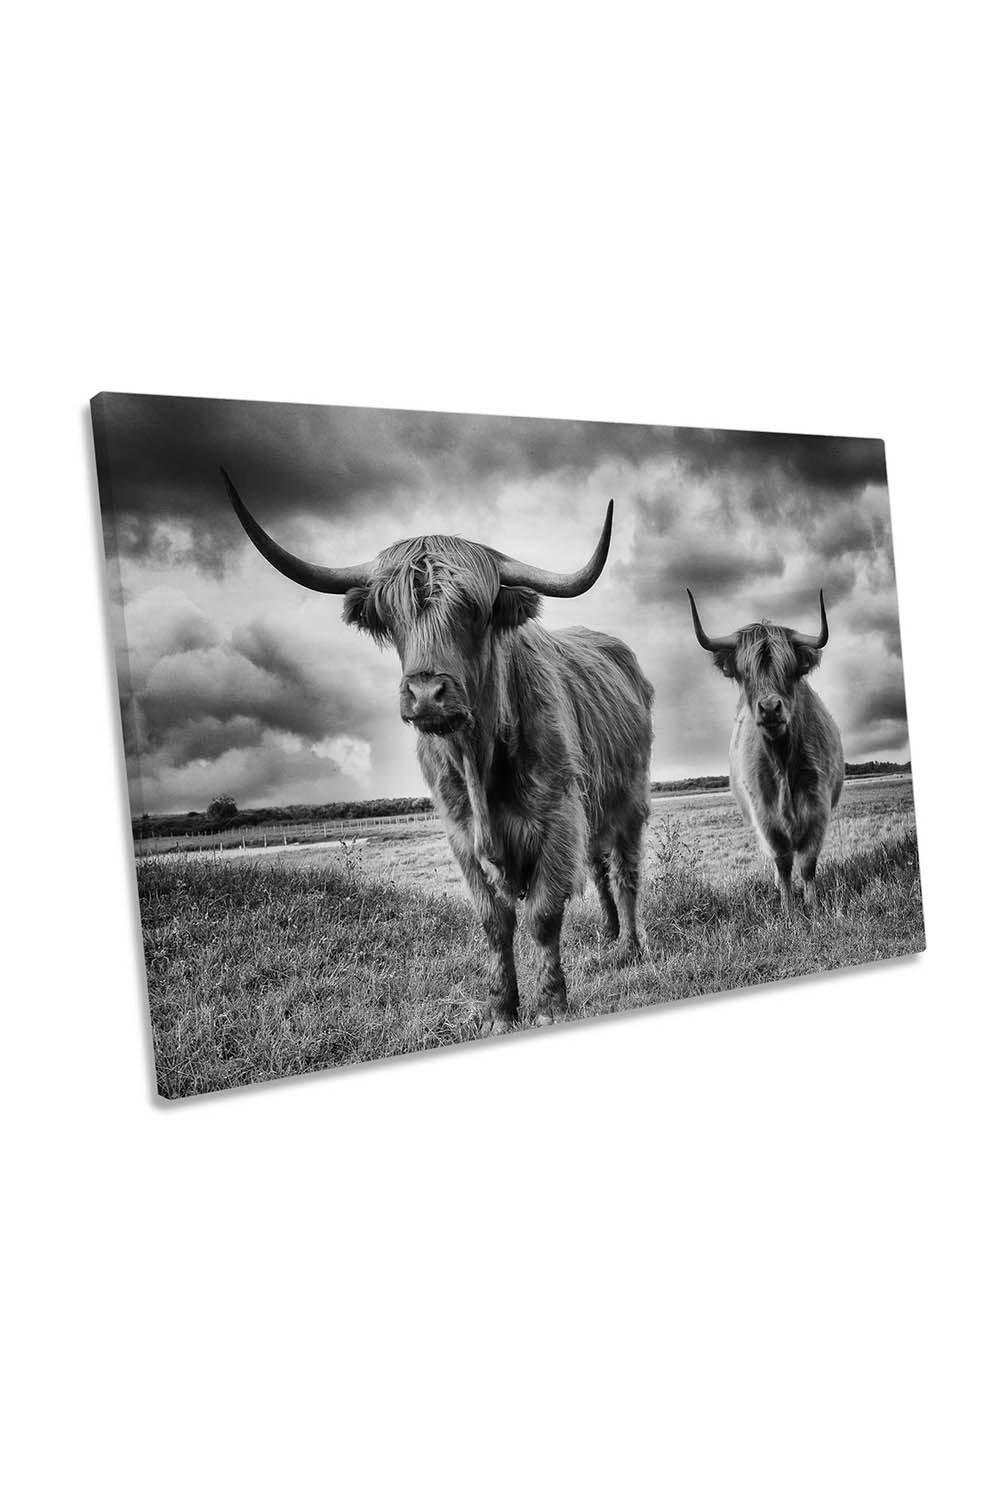 Highland Cows Countryside Black and White Canvas Wall Art Picture Print